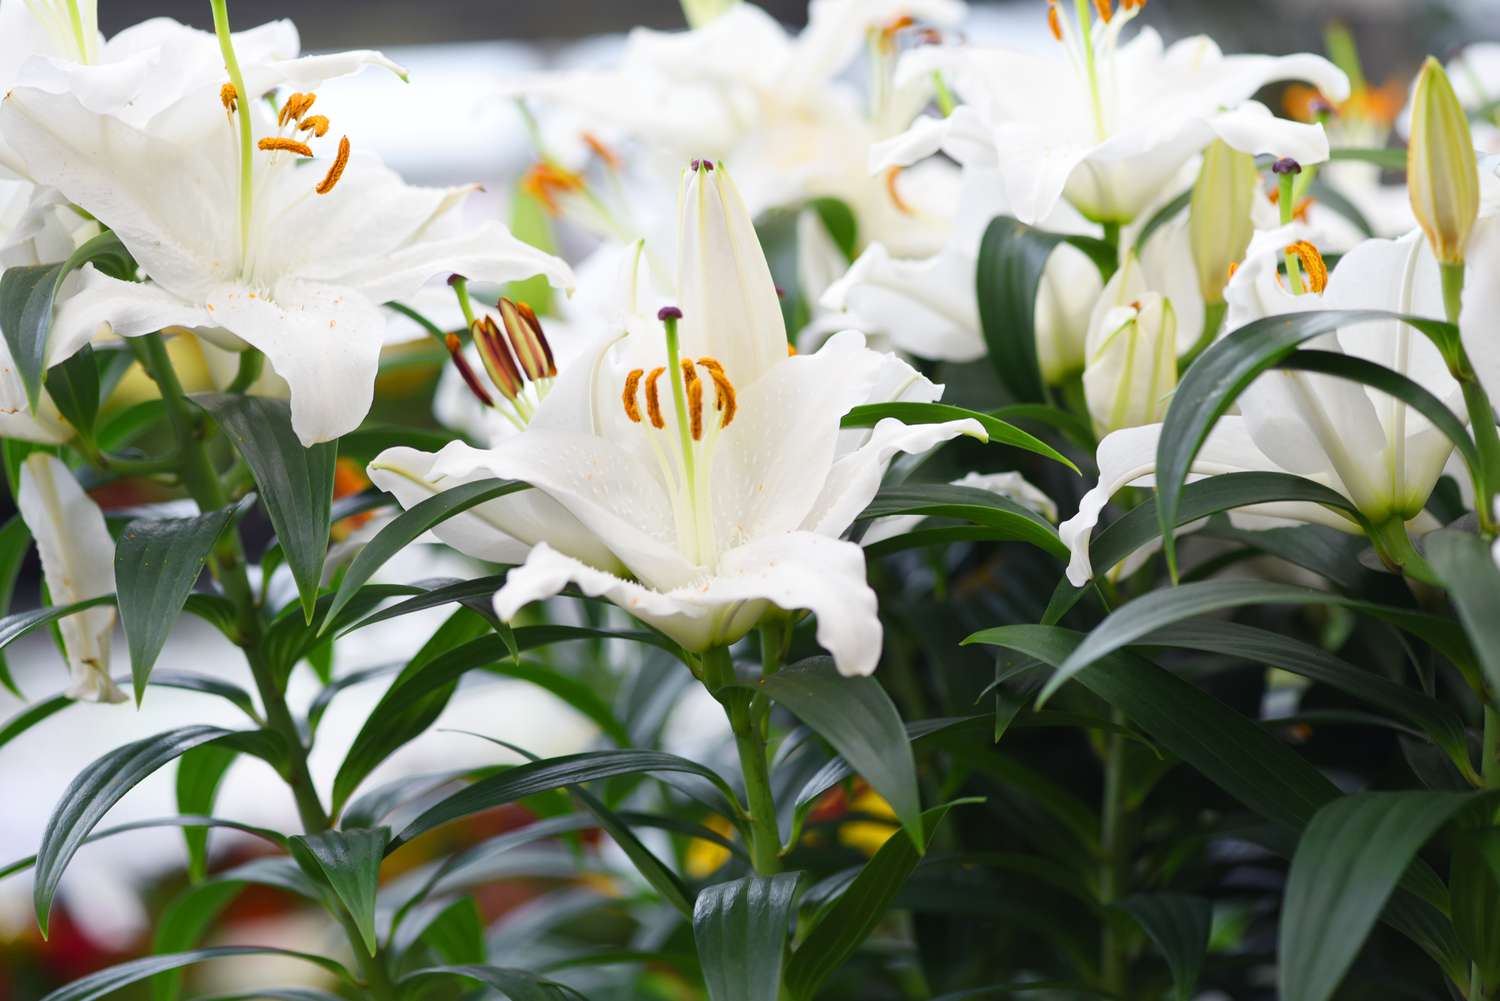 Casa blanca lily flowers with large white petals on stems